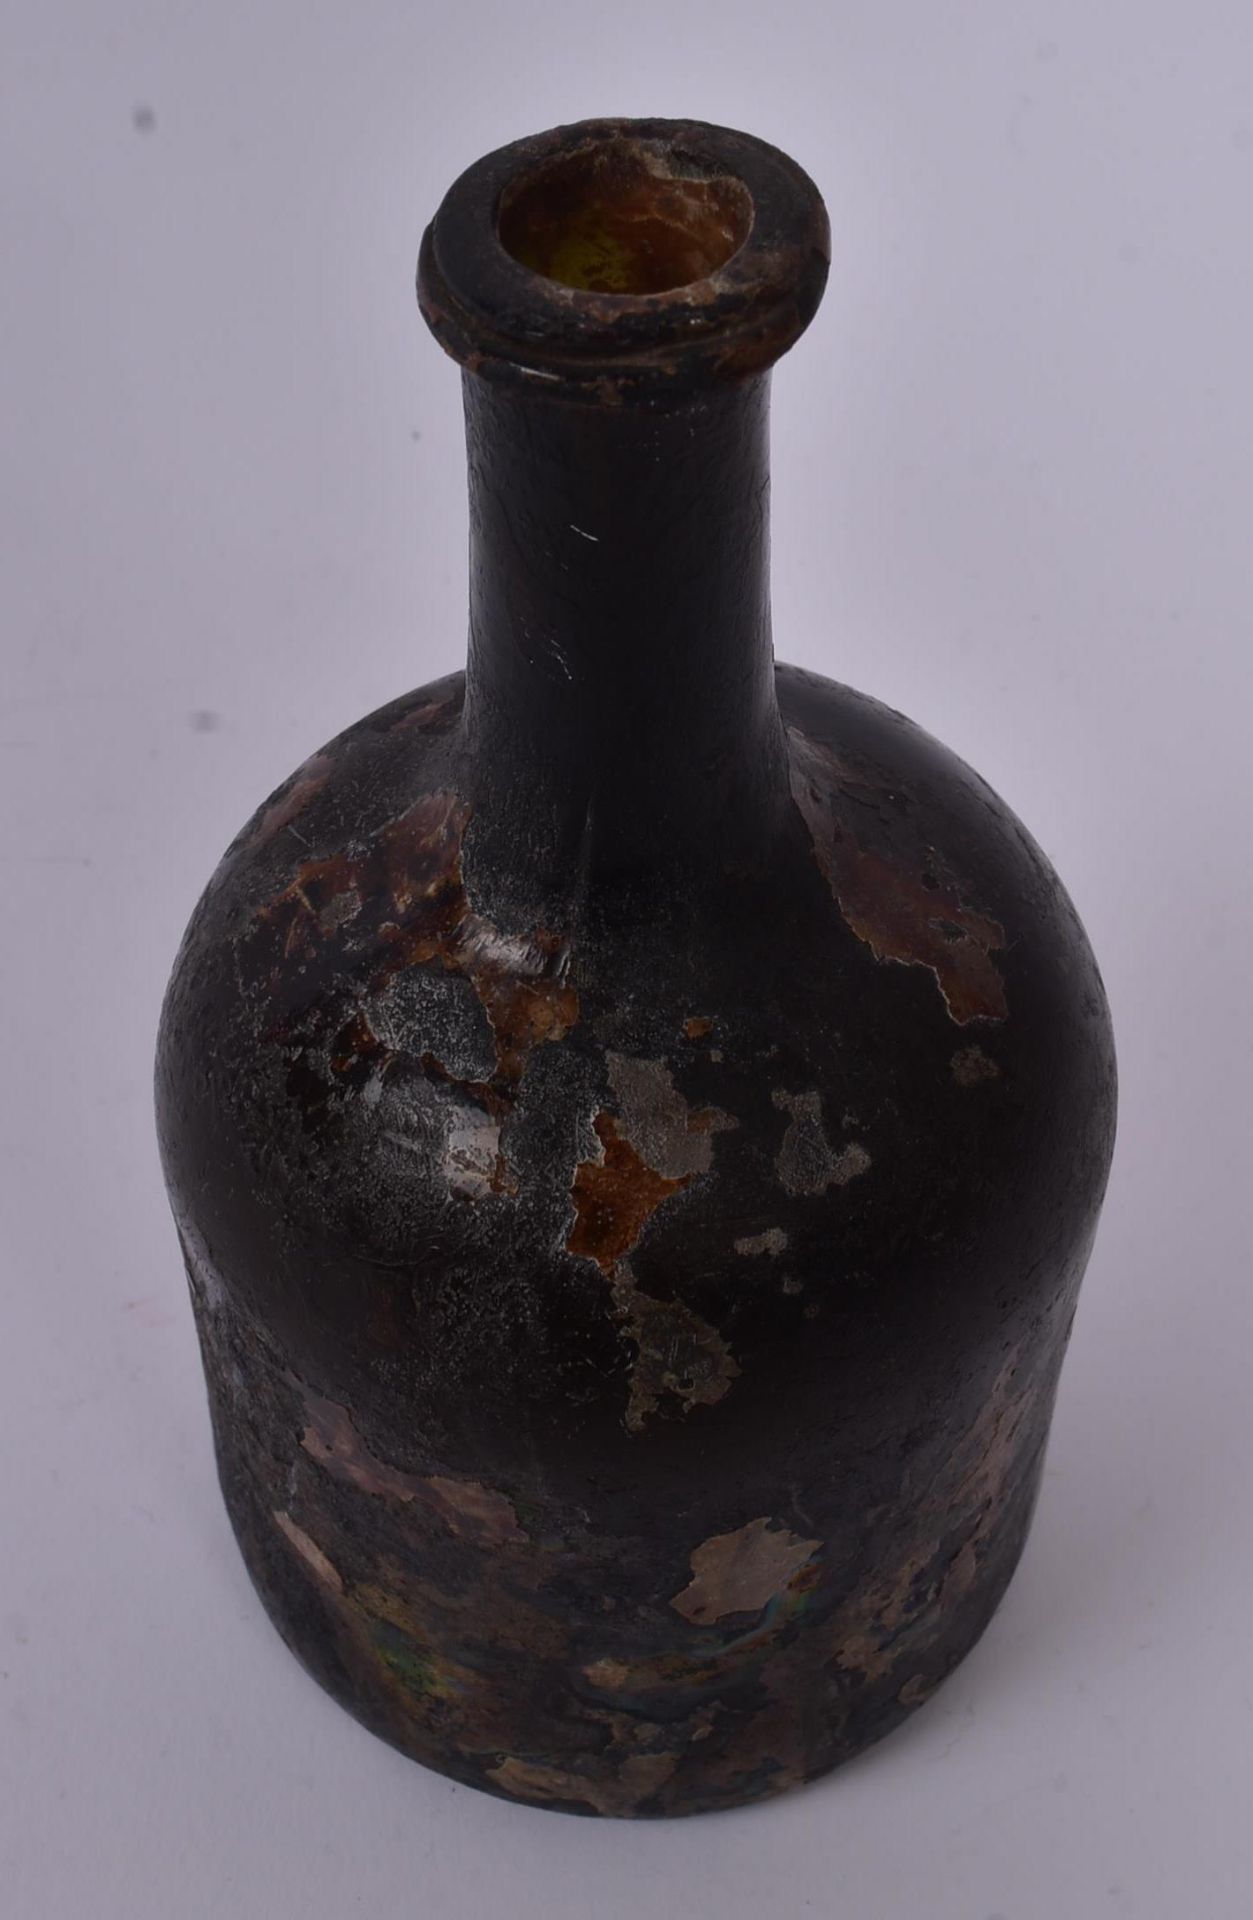 18TH CENTURY CIRCA 1700S GLASS SHIP WRECK WINE BOTTLE - Image 3 of 5